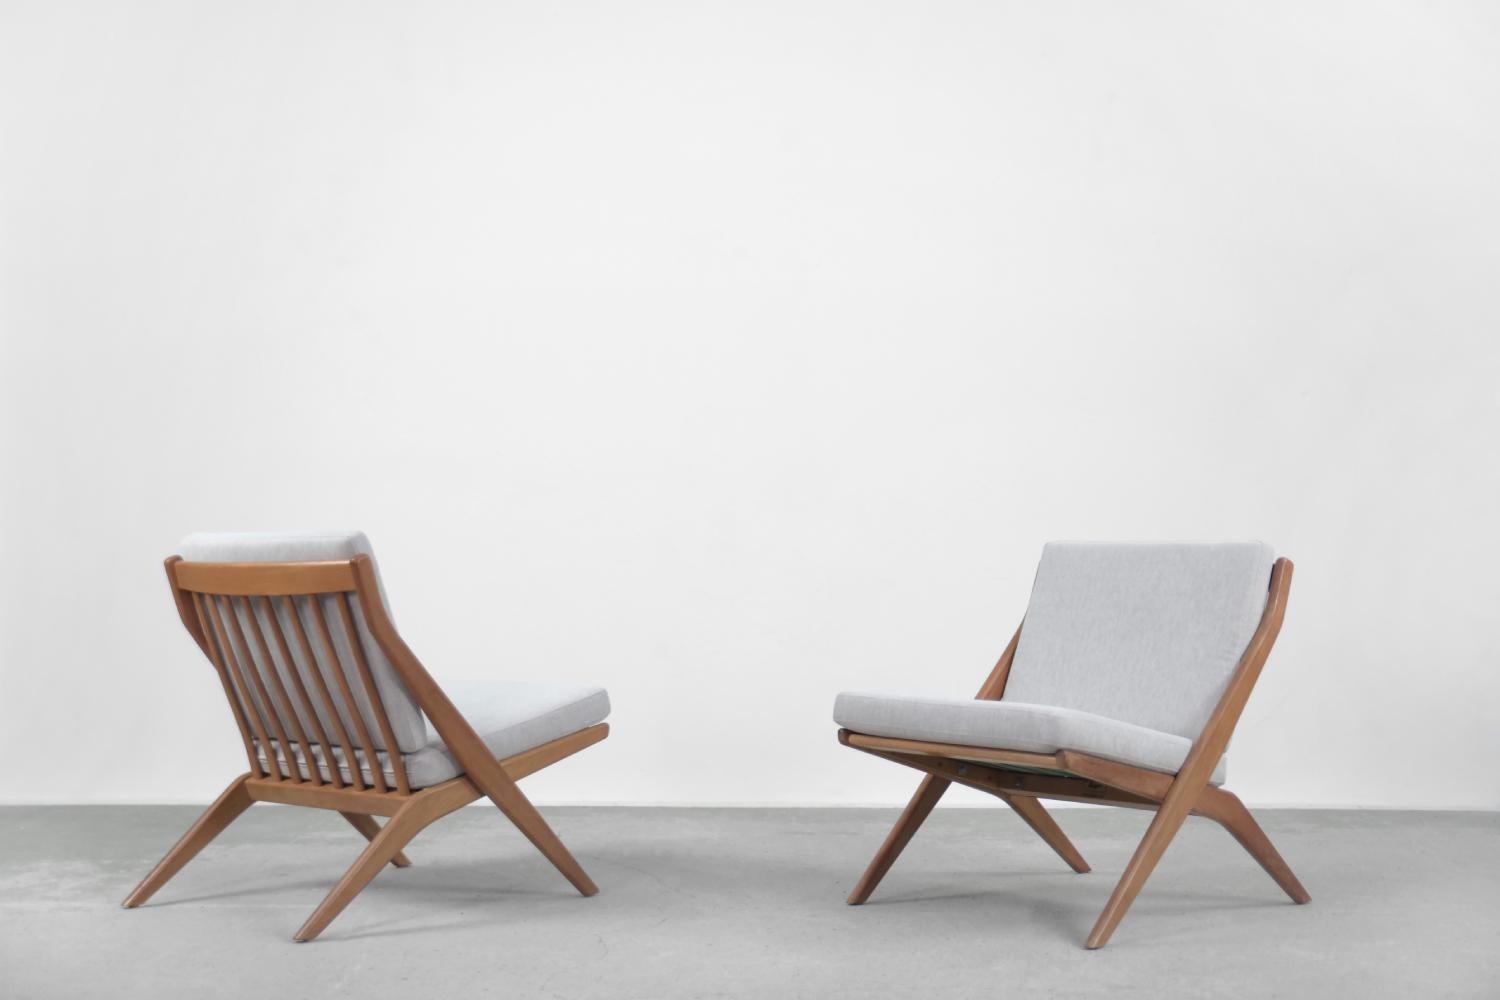 Pair of Mid-Century Modern Swedish Scissor Chairs by Folke Ohlsson for Bodafors For Sale 5